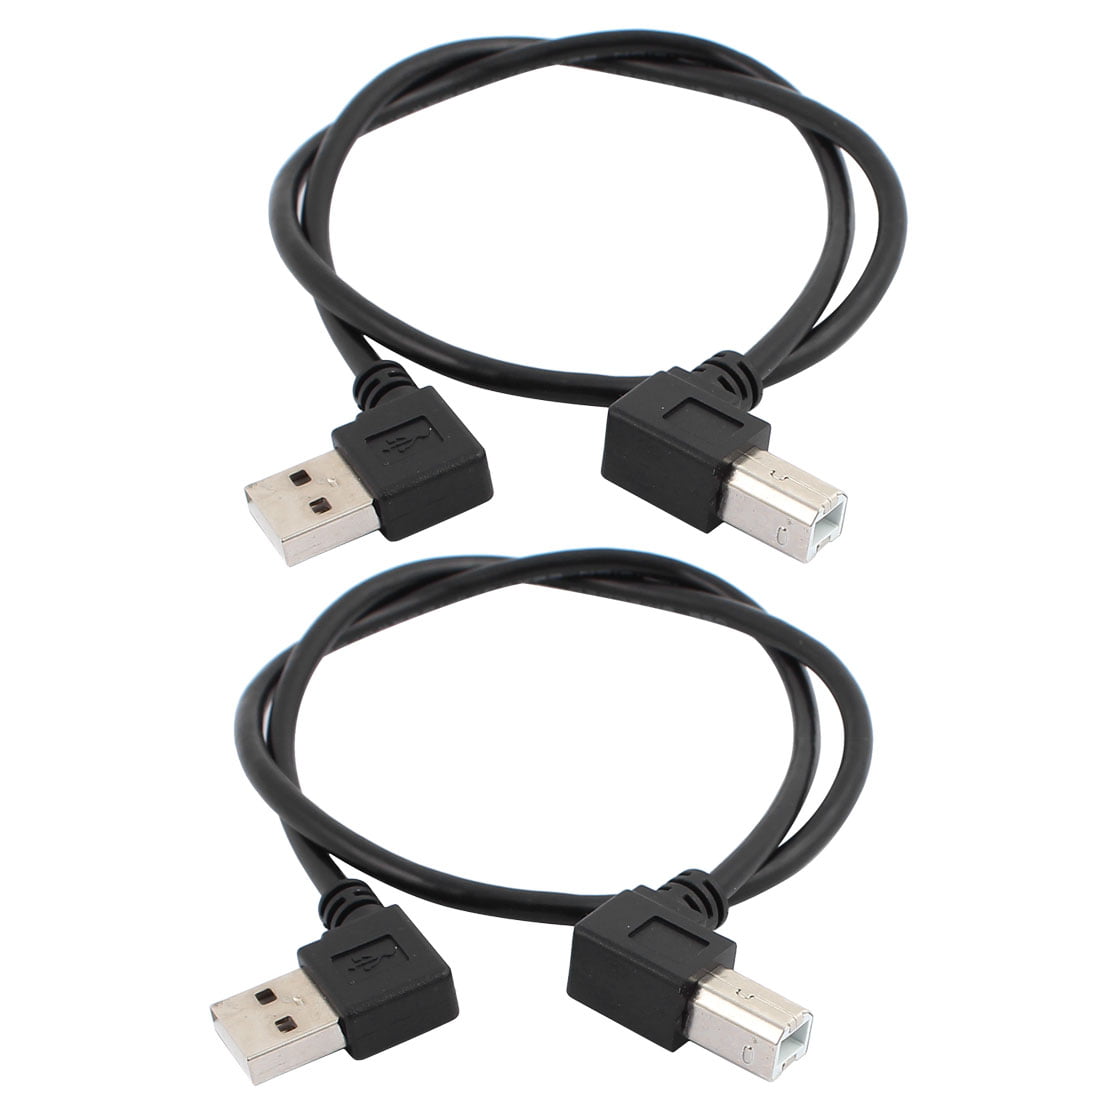 50cm USB 2.0 Type B Male to B Male 90 Degree Right Angle Printer Extension Cable 